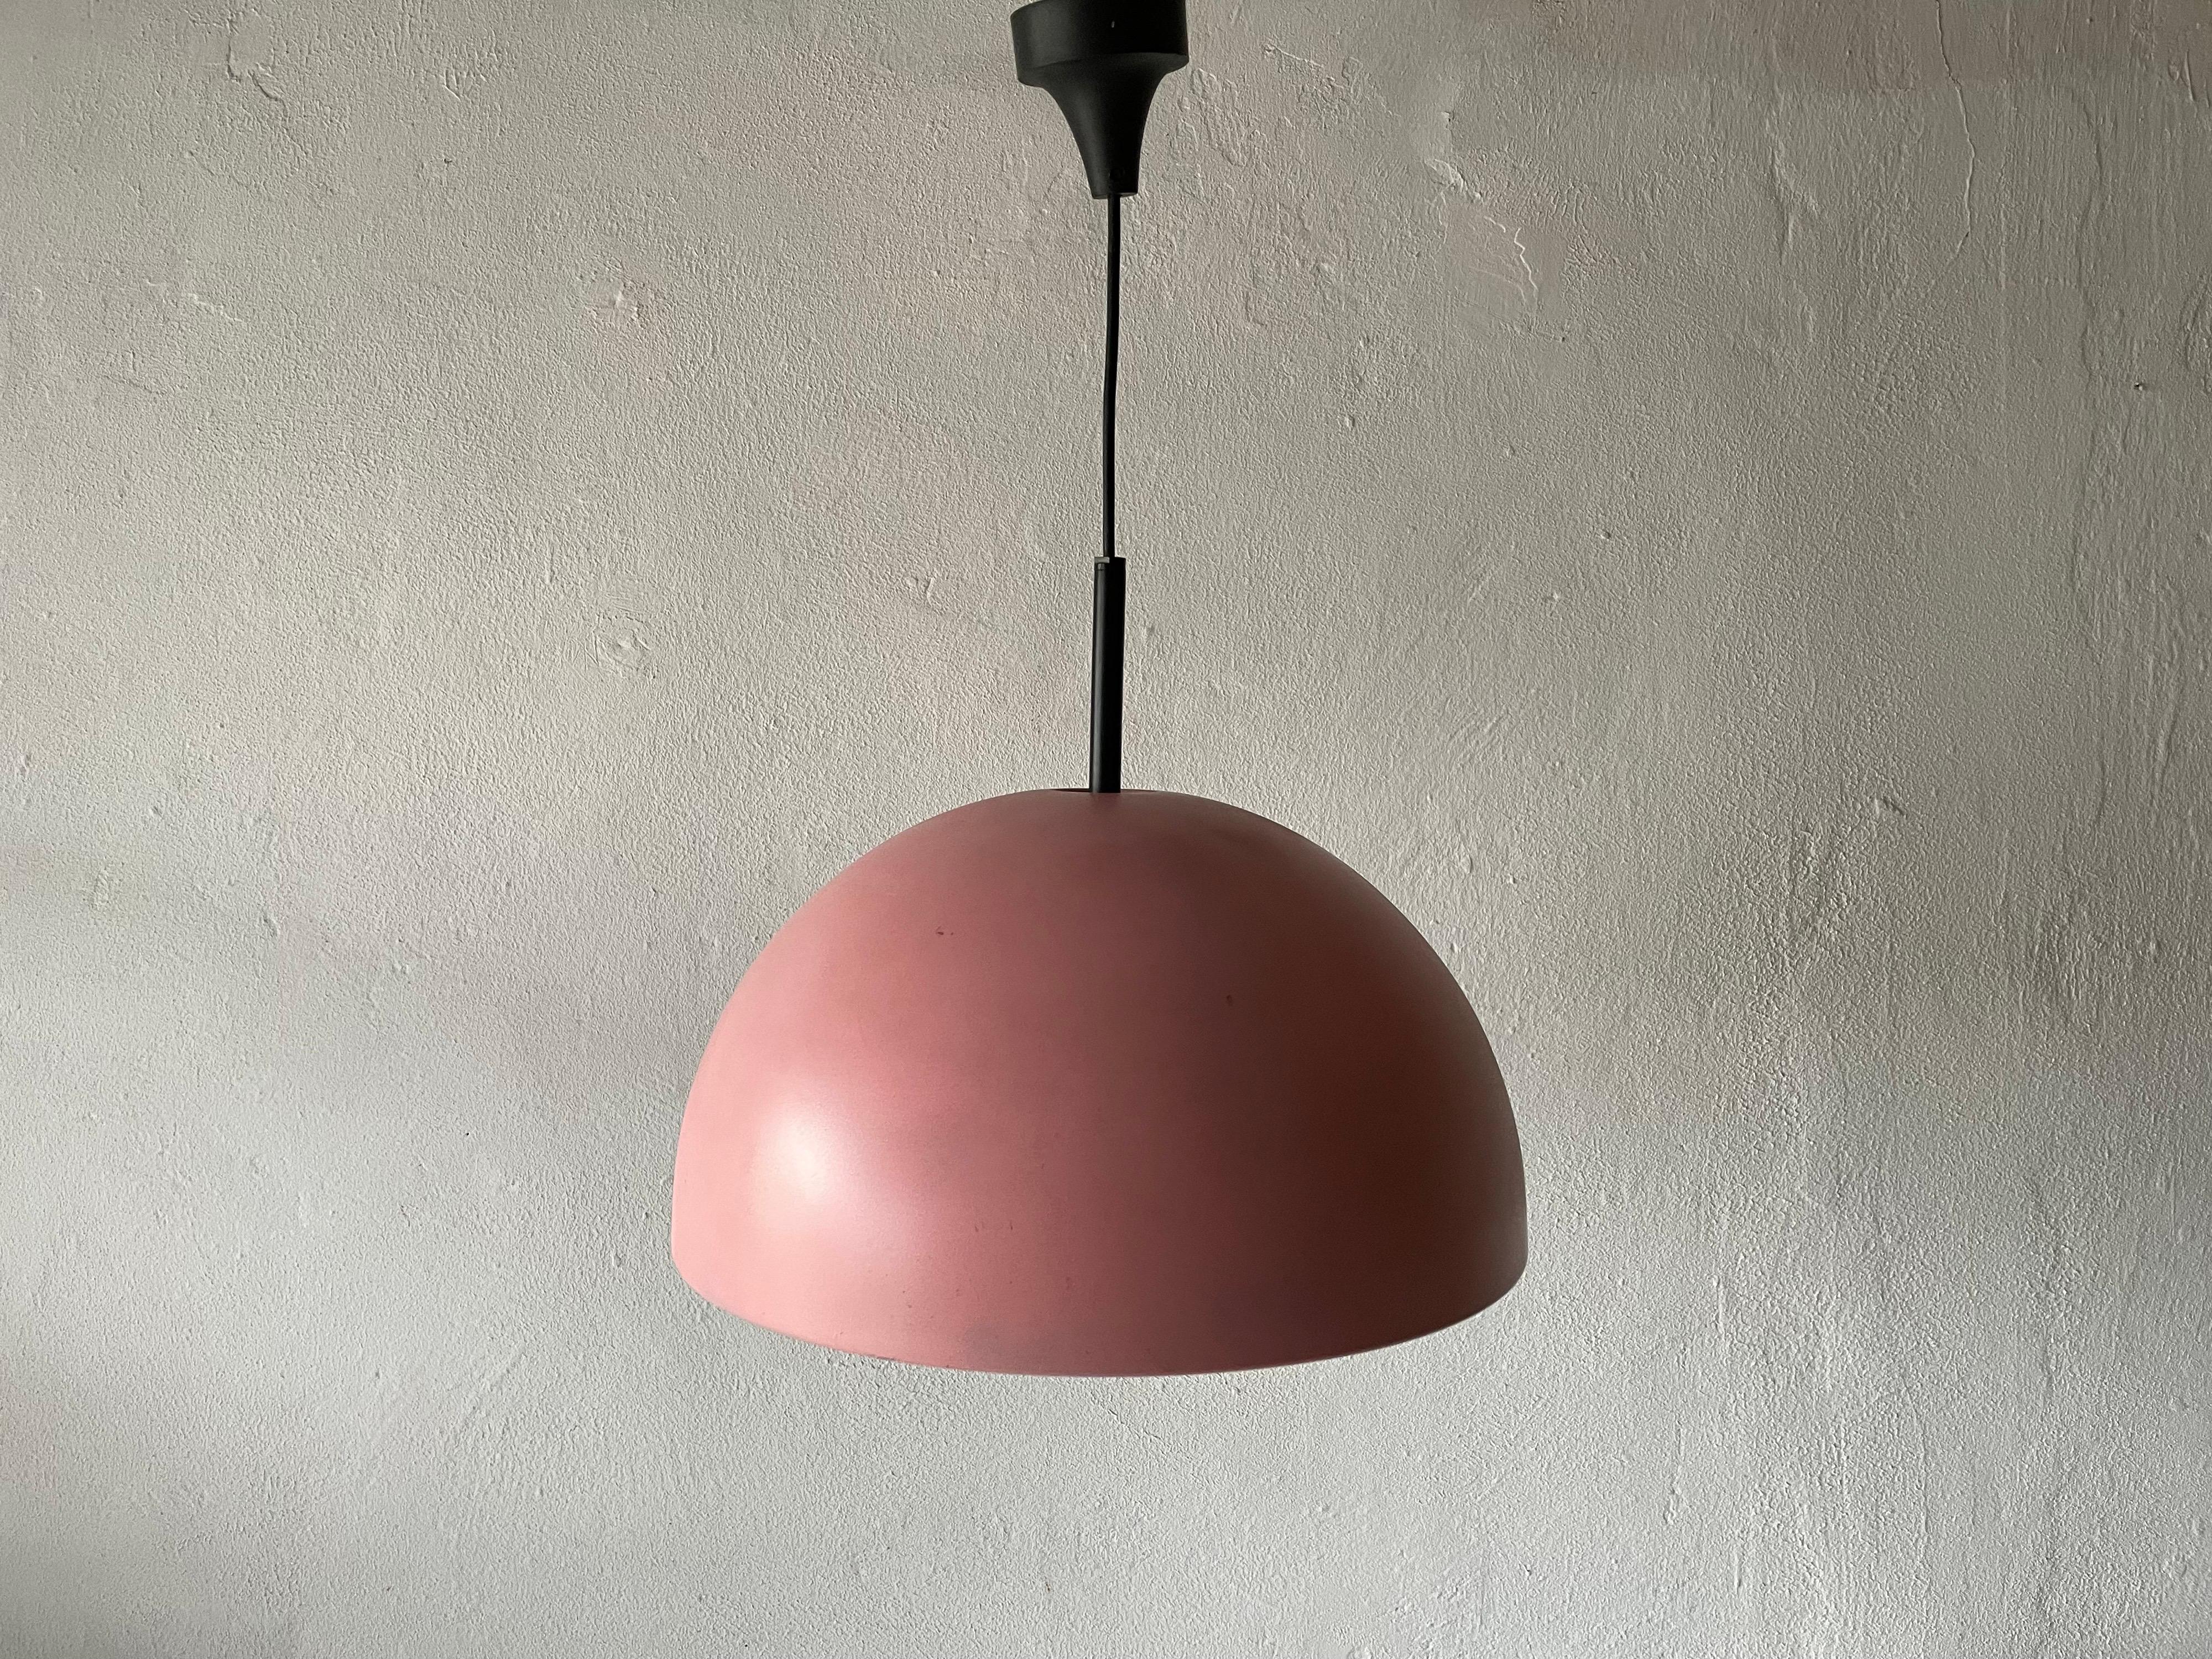 Rare Pink Metal Pendant Lamp by Staff Leuchten, 1970s, Germany For Sale 5